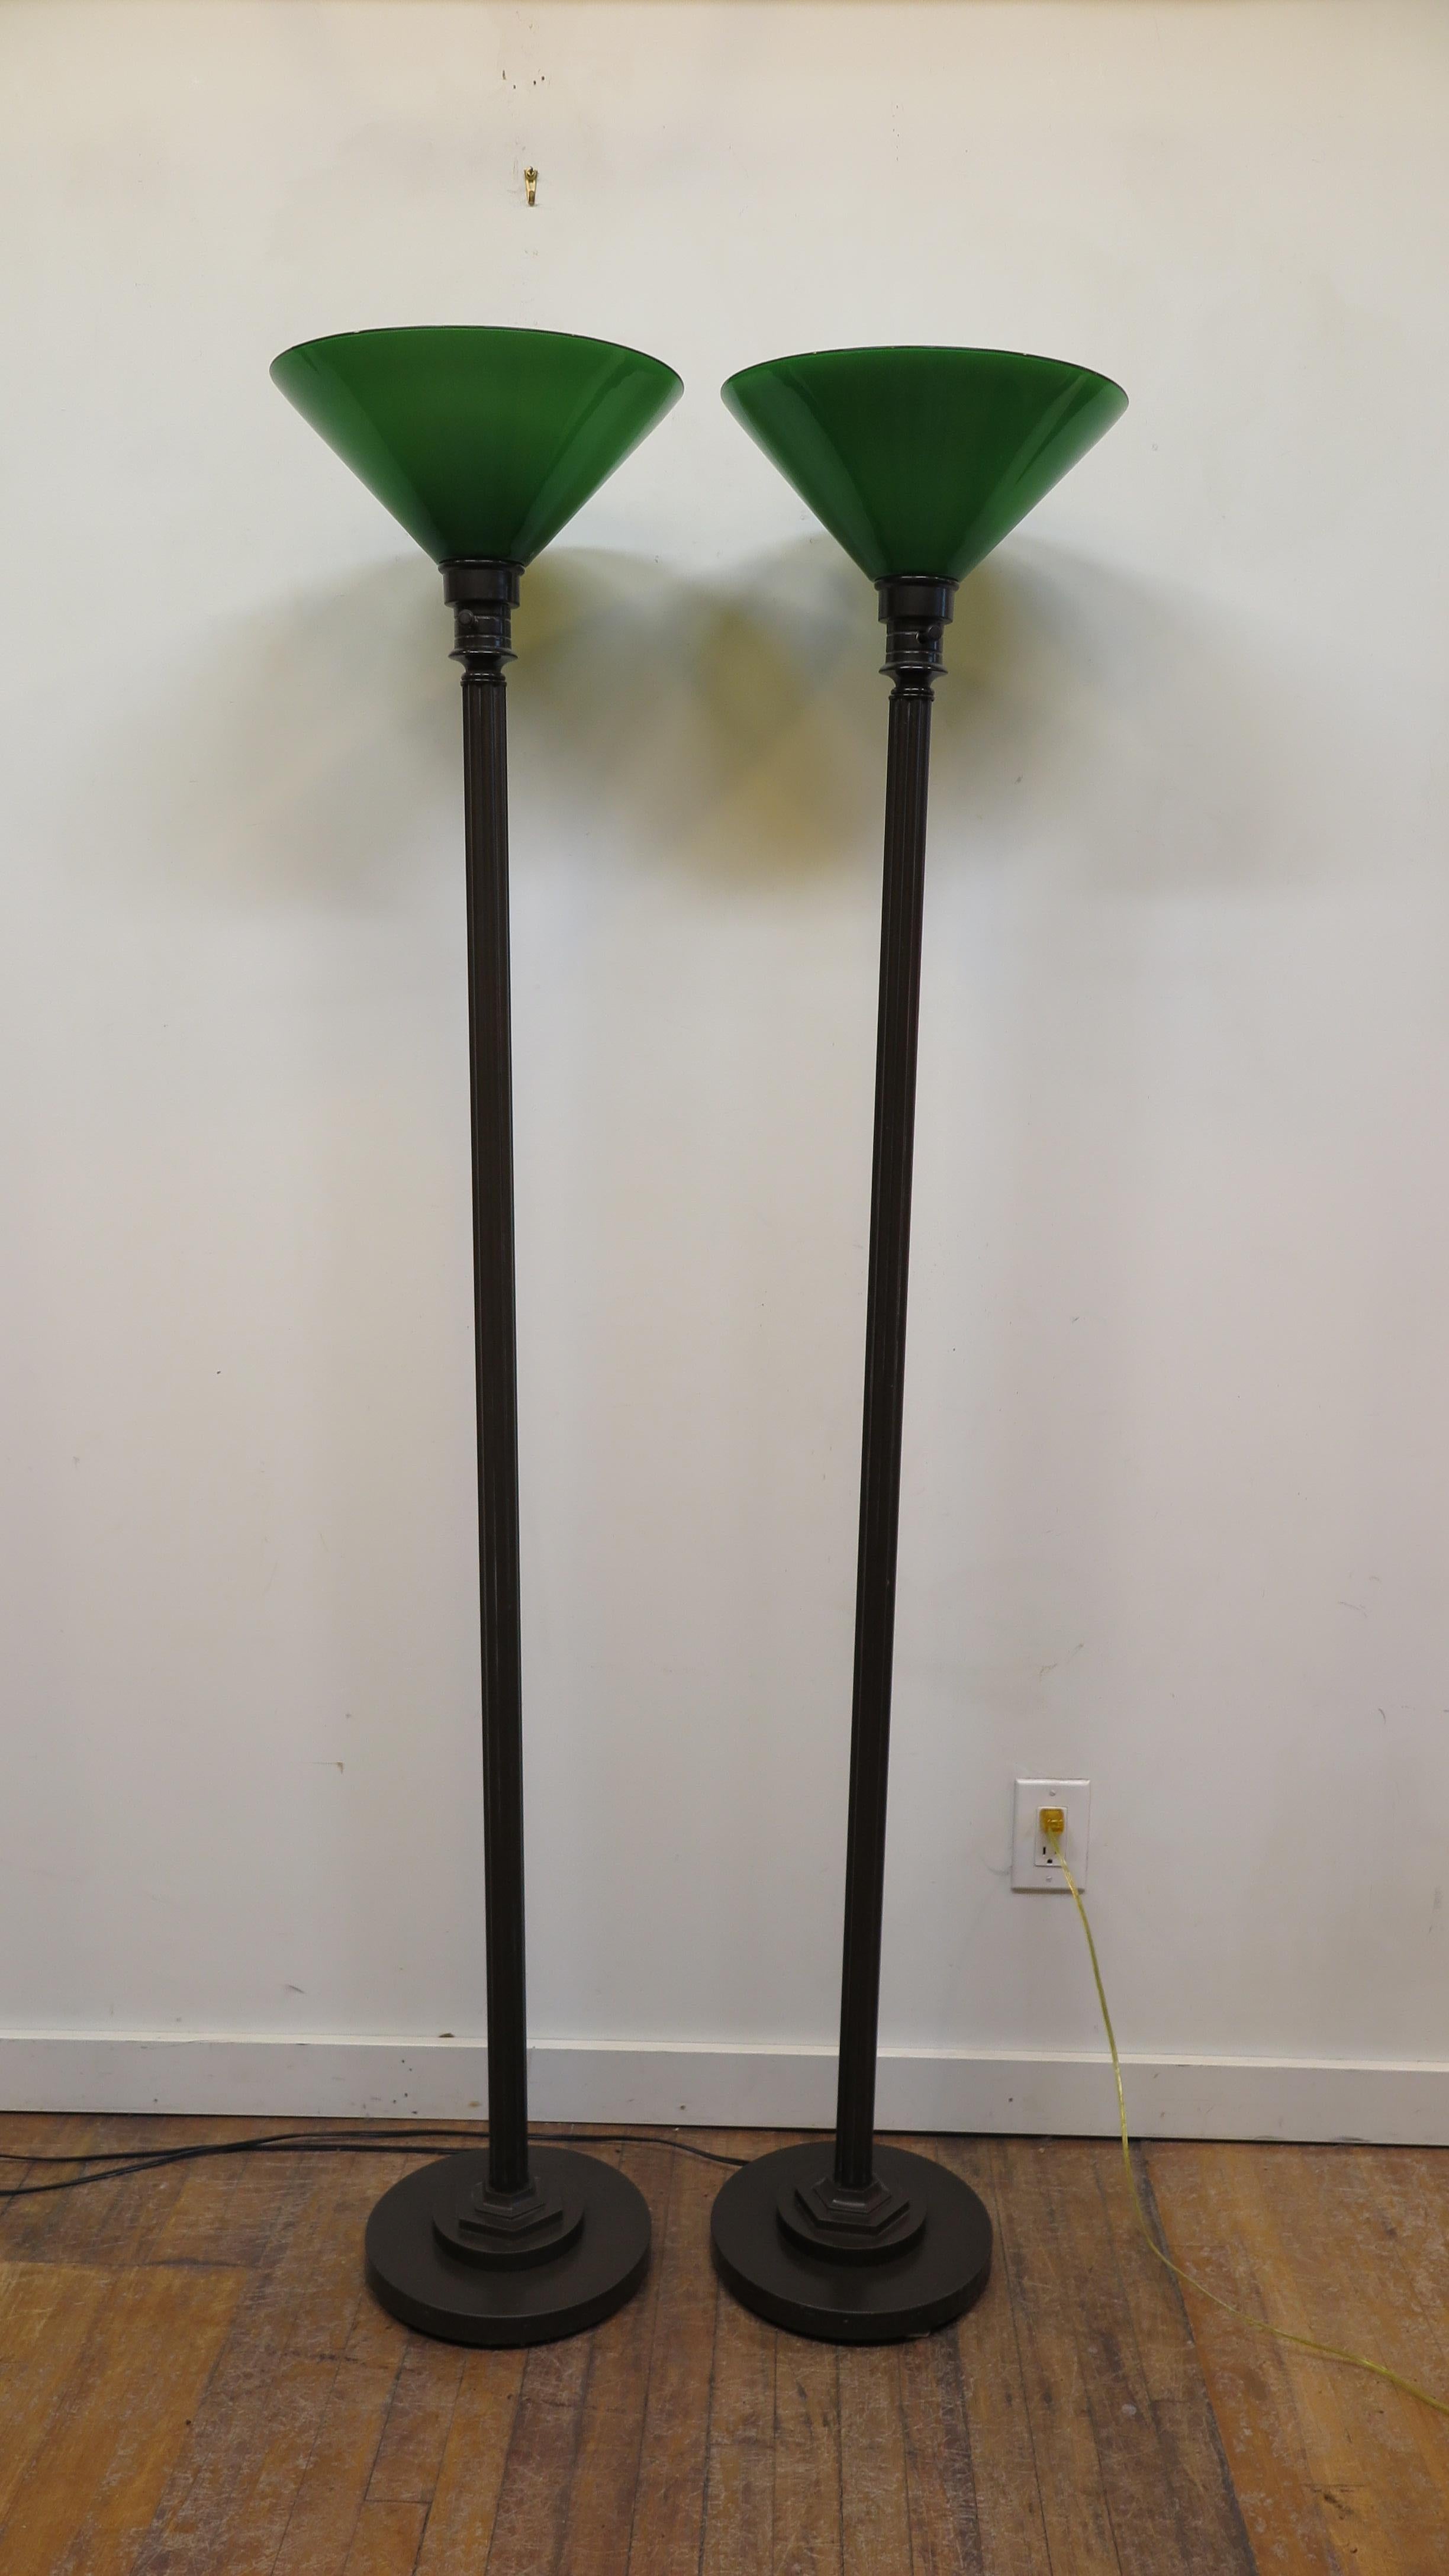 Pair of bronzed metal torchiere floor lamps library style with green glass shades. Late 20th century good quality in very good condition. Lamps have a 3 way switch, accepts LED bulbs.